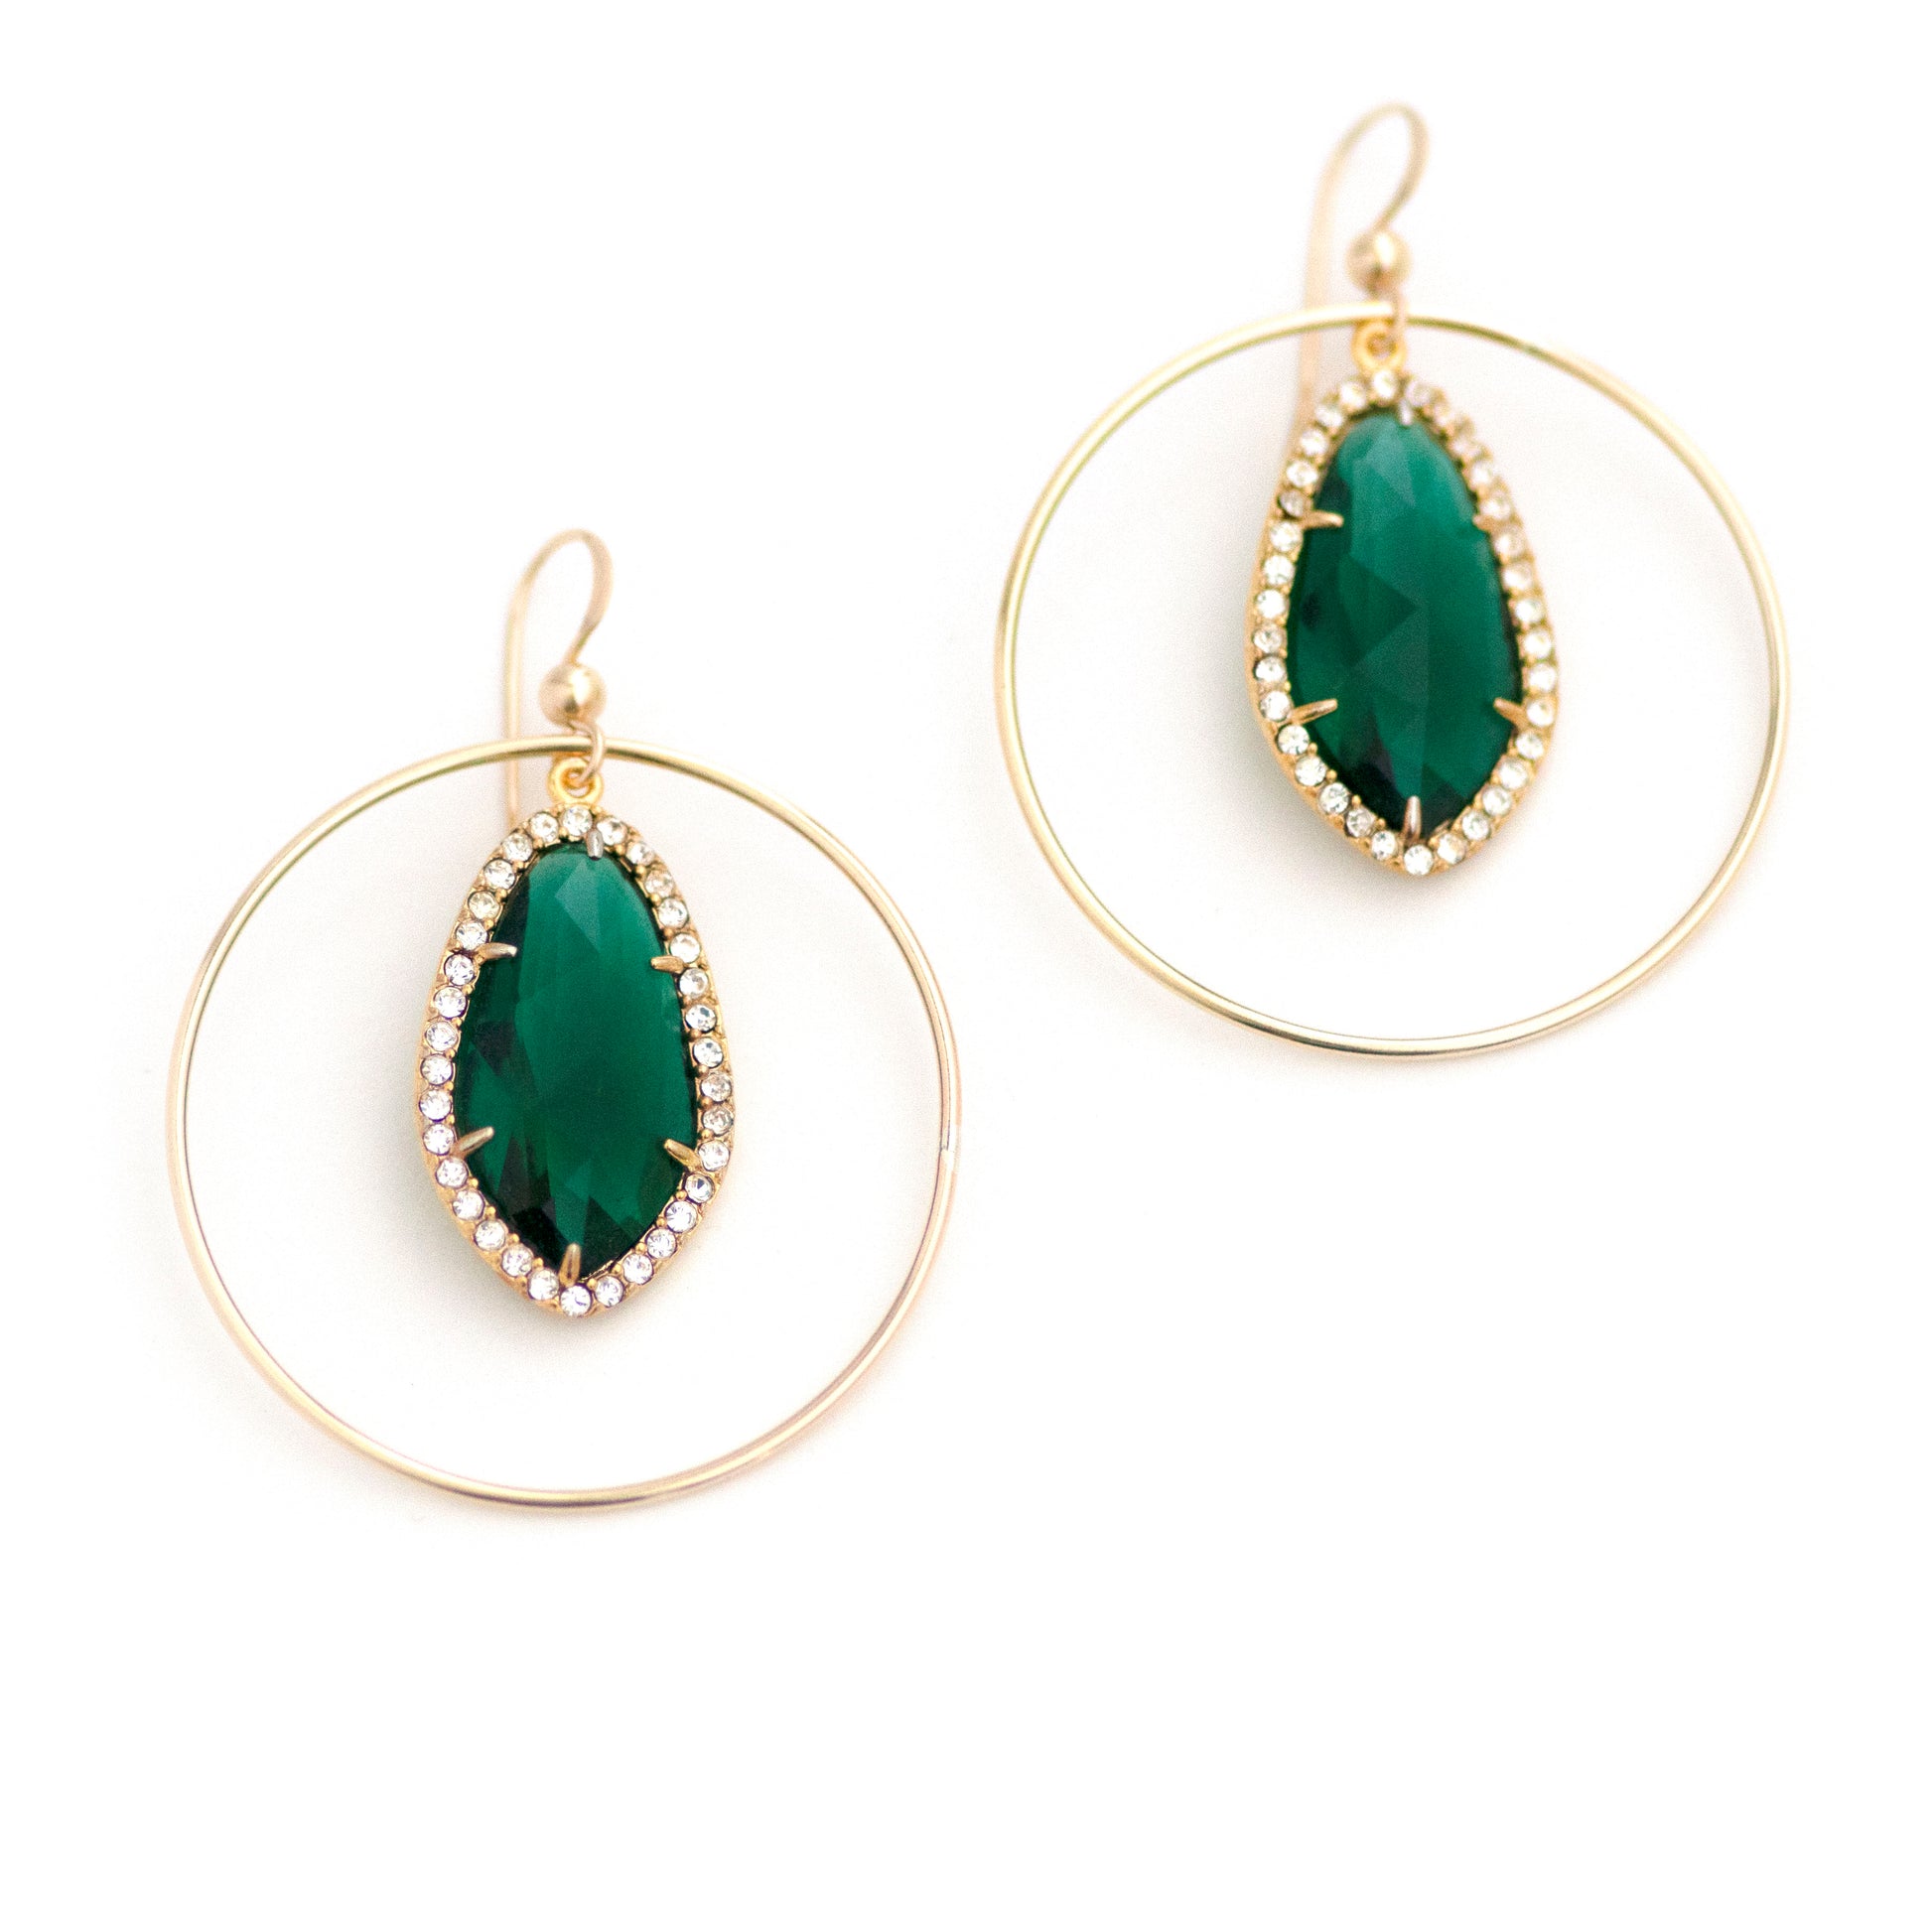 These upcycled vintage earrings are made up of:  Gold tone vintage emerald green crystal rhinestone drops and 14k gold fill.